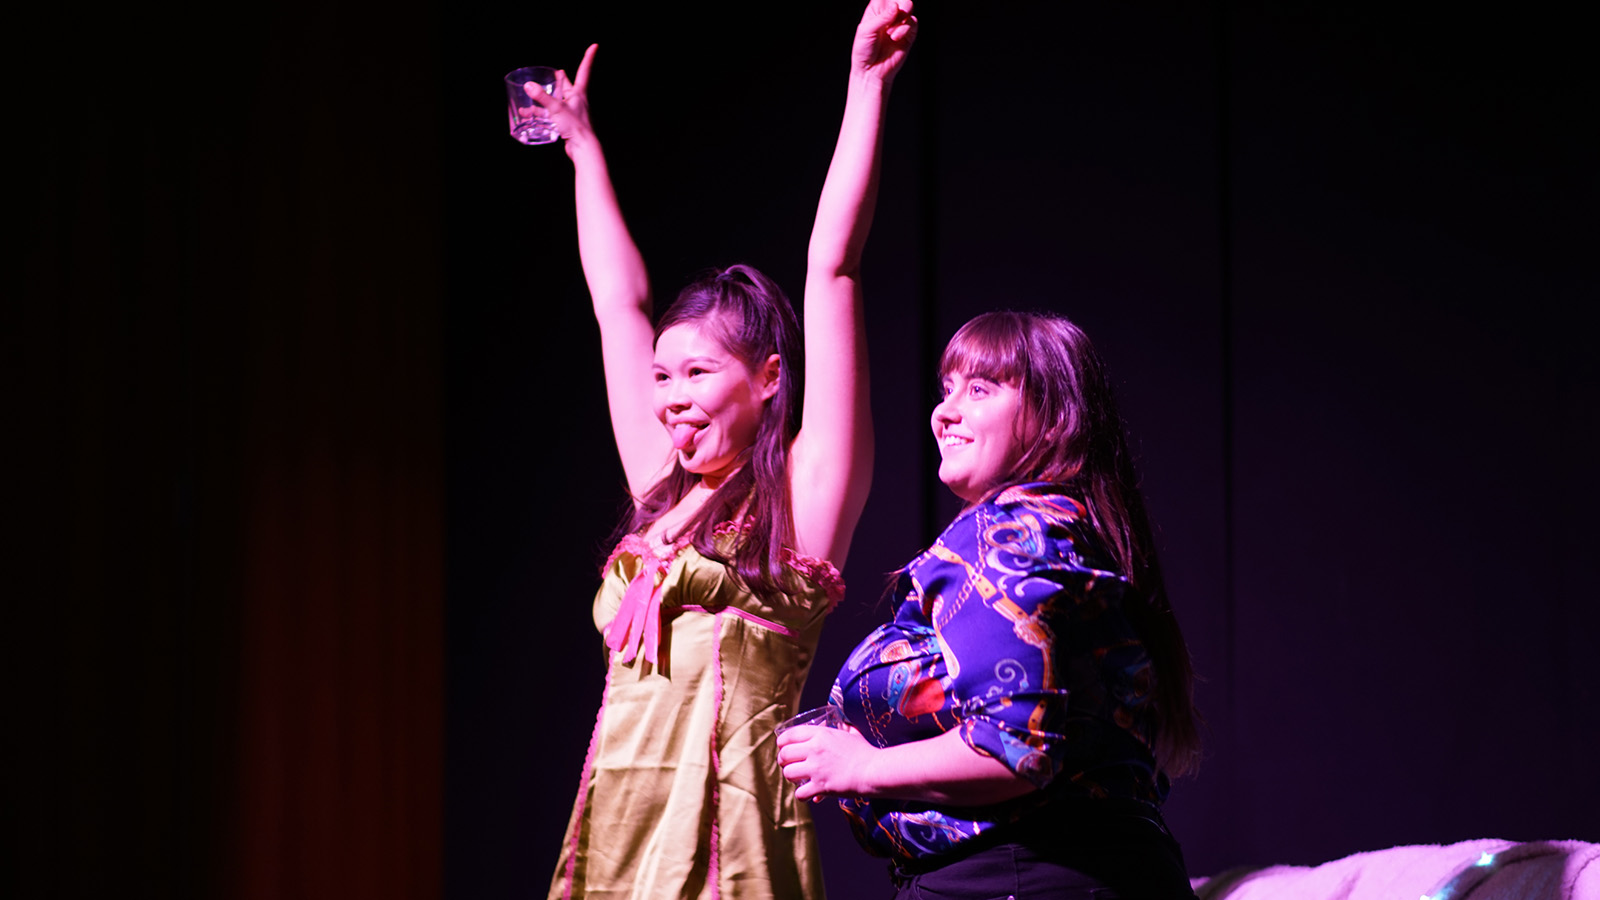 Two women stand on stage, one with her arms in the air and her tongue out